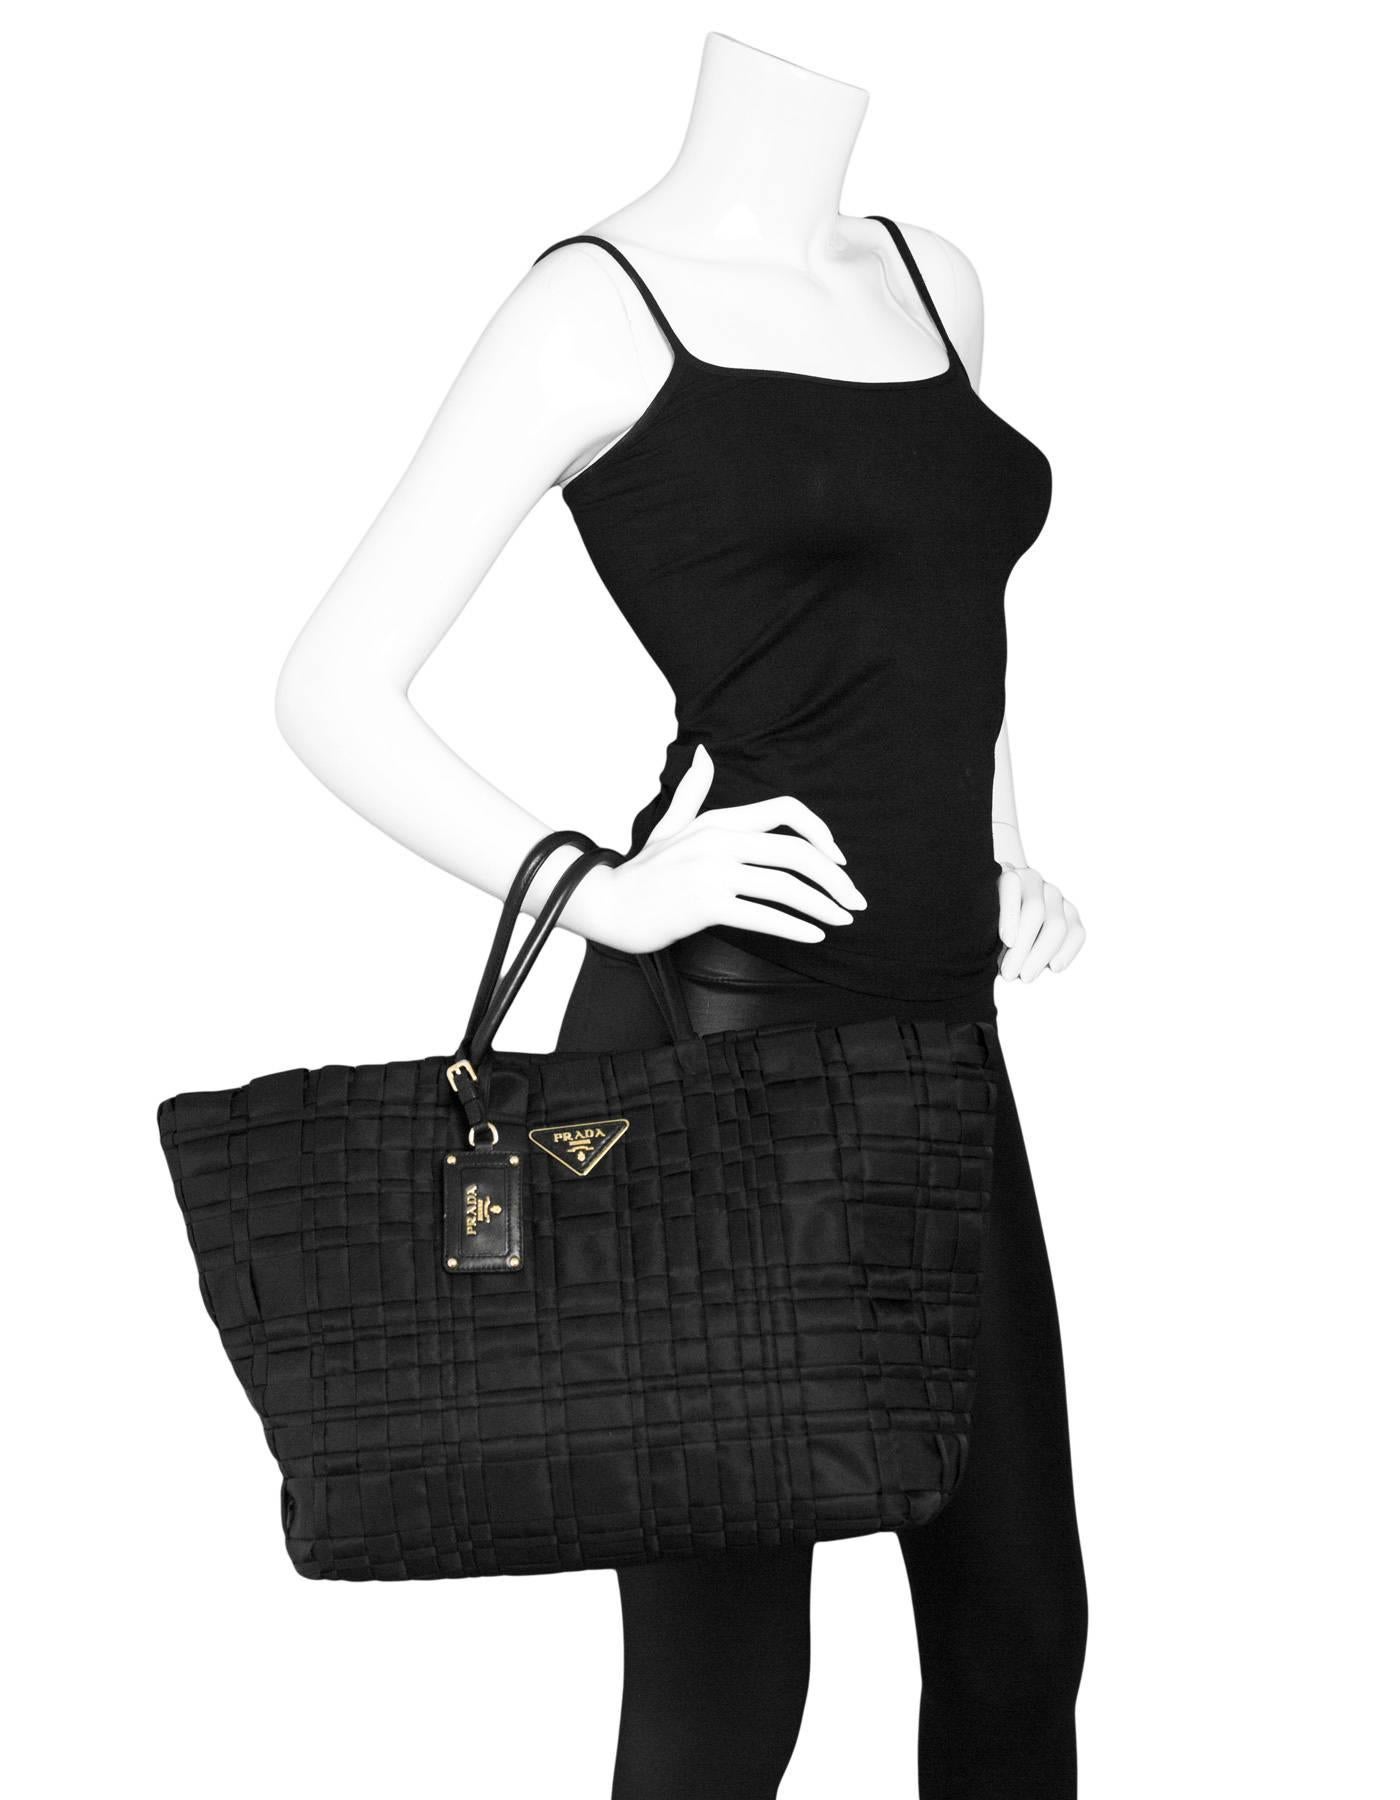 Prada Black Tessuto Woven Tote Bag

Made In: Italy
Color: Black
Materials: Tessuto nylon, leather
Lining: Black textile
Closure/Opening: Open top with center snap
Exterior Pockets: None
Interior Pockets: Two zip wall pockets
Overall Condition: